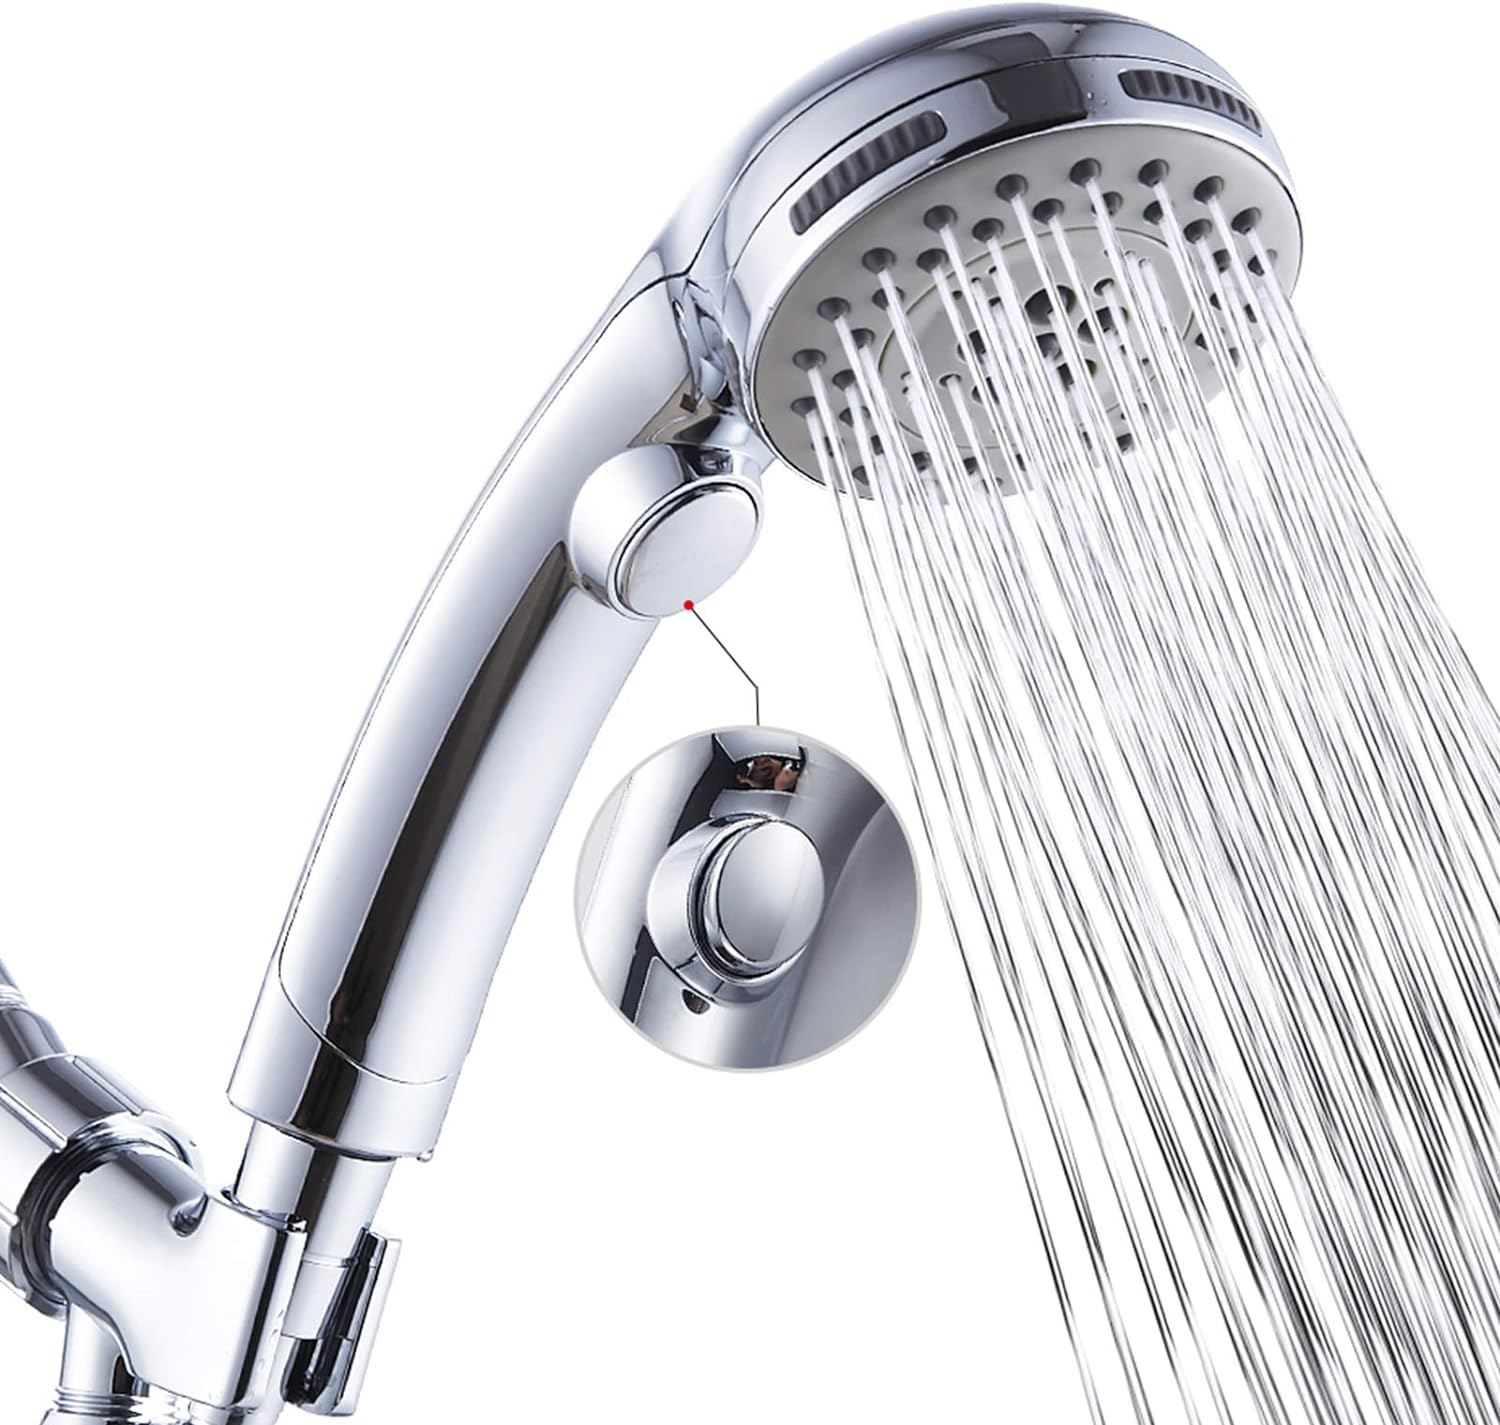 High Pressure 6 Setting Shower Head Hand-Held with ON/OFF Switch and Spa Spray Mode - Hand Held Shower Head with Handheld Spray - Shower Head with Hose - Chrome